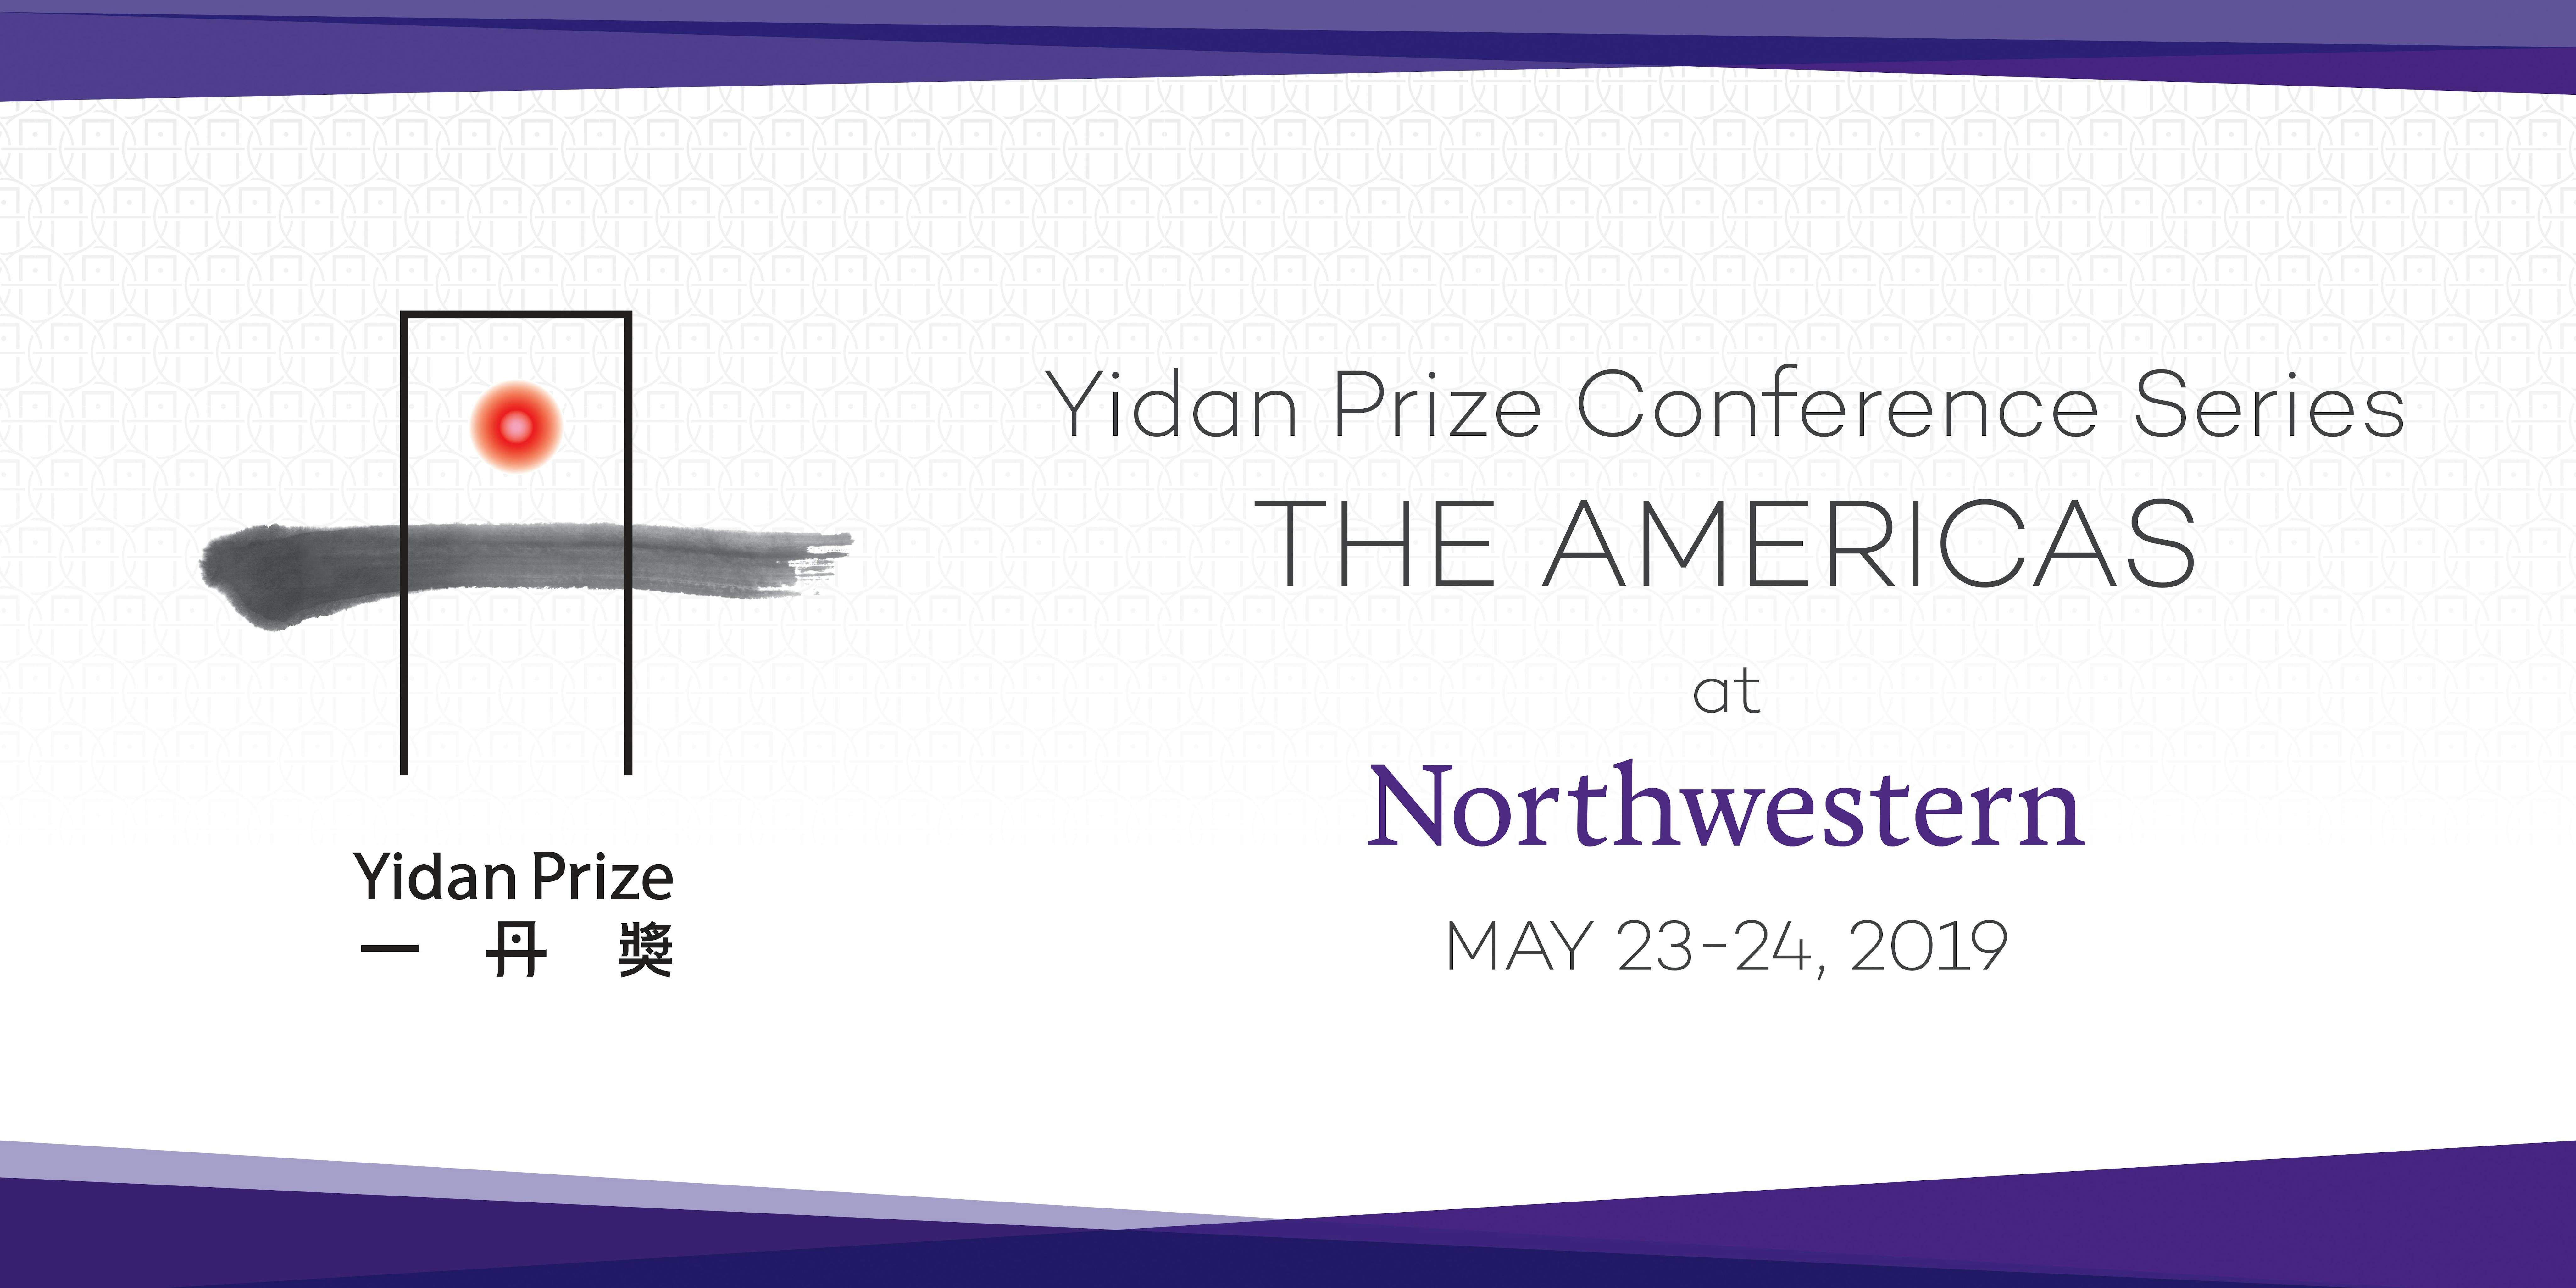 Yidan Prize Conference Series, The Americas